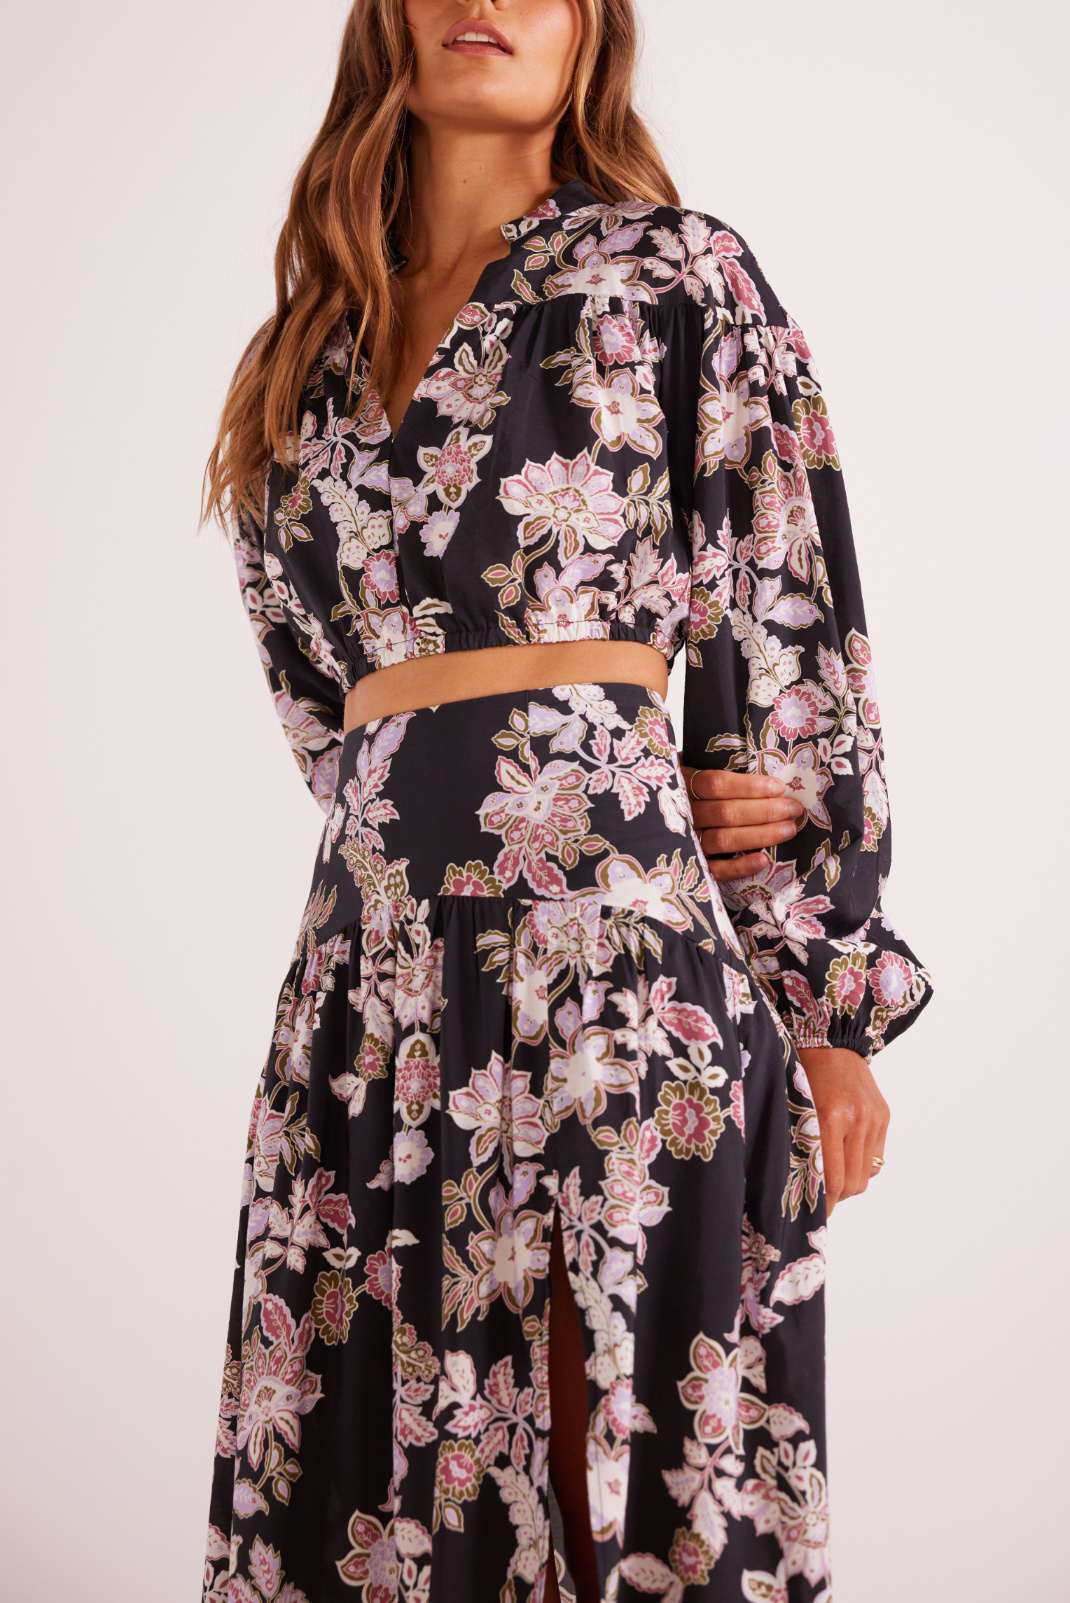 Fall for Me Floral Dress - Black - Small - 3X - The Pink Porcupine ltd.